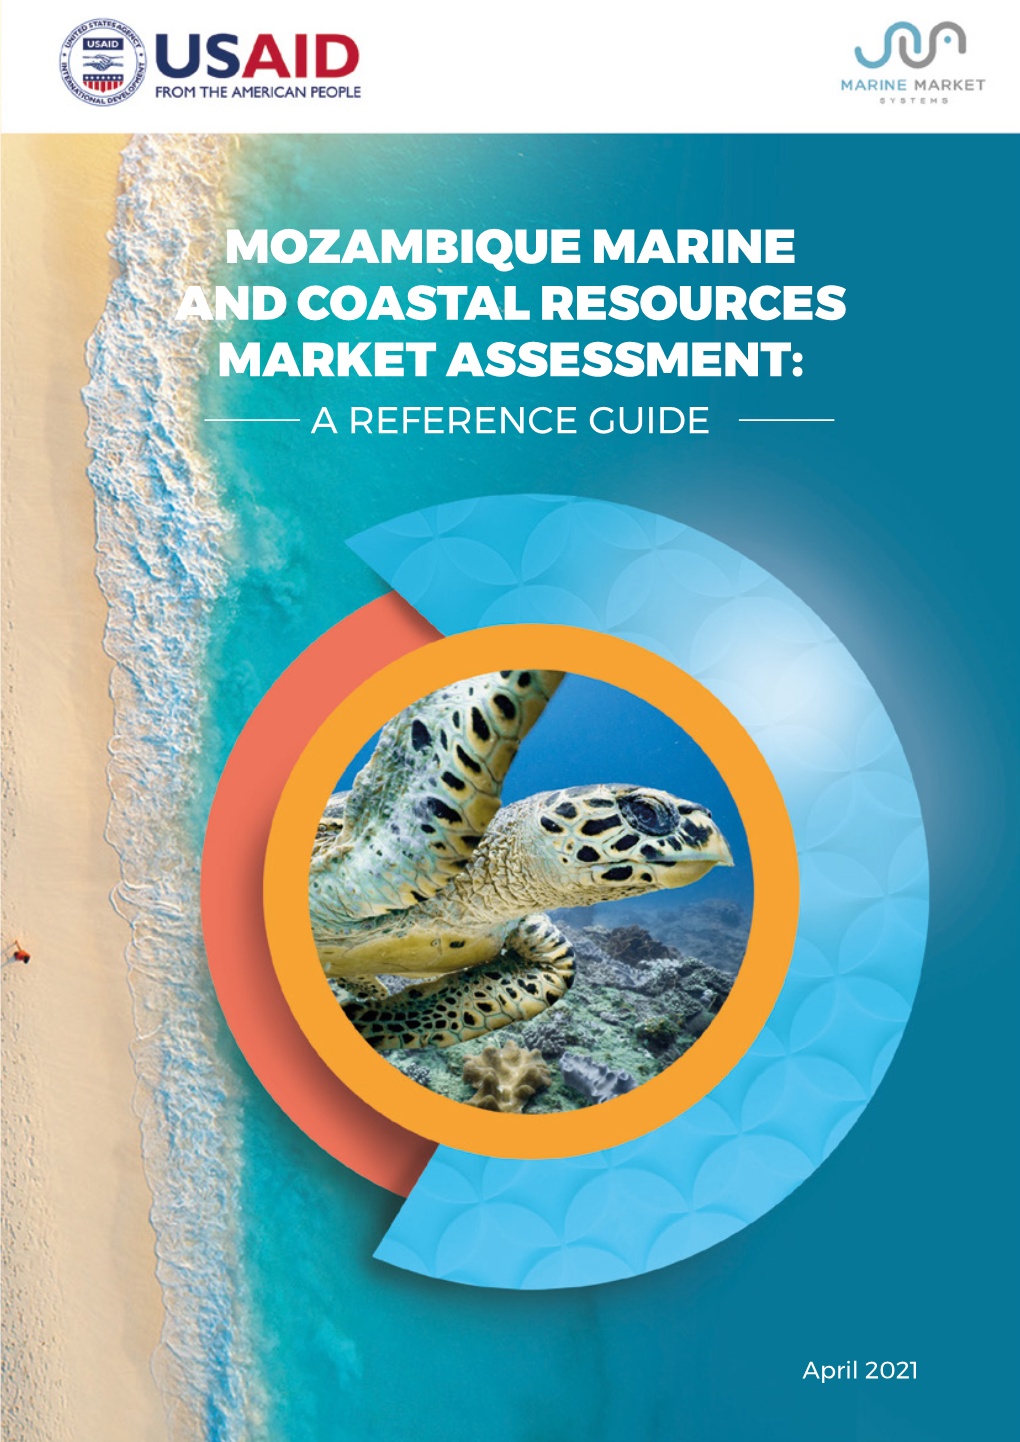 Mozambique Marine and Coastal Resources Market Assessment: a Reference Guide